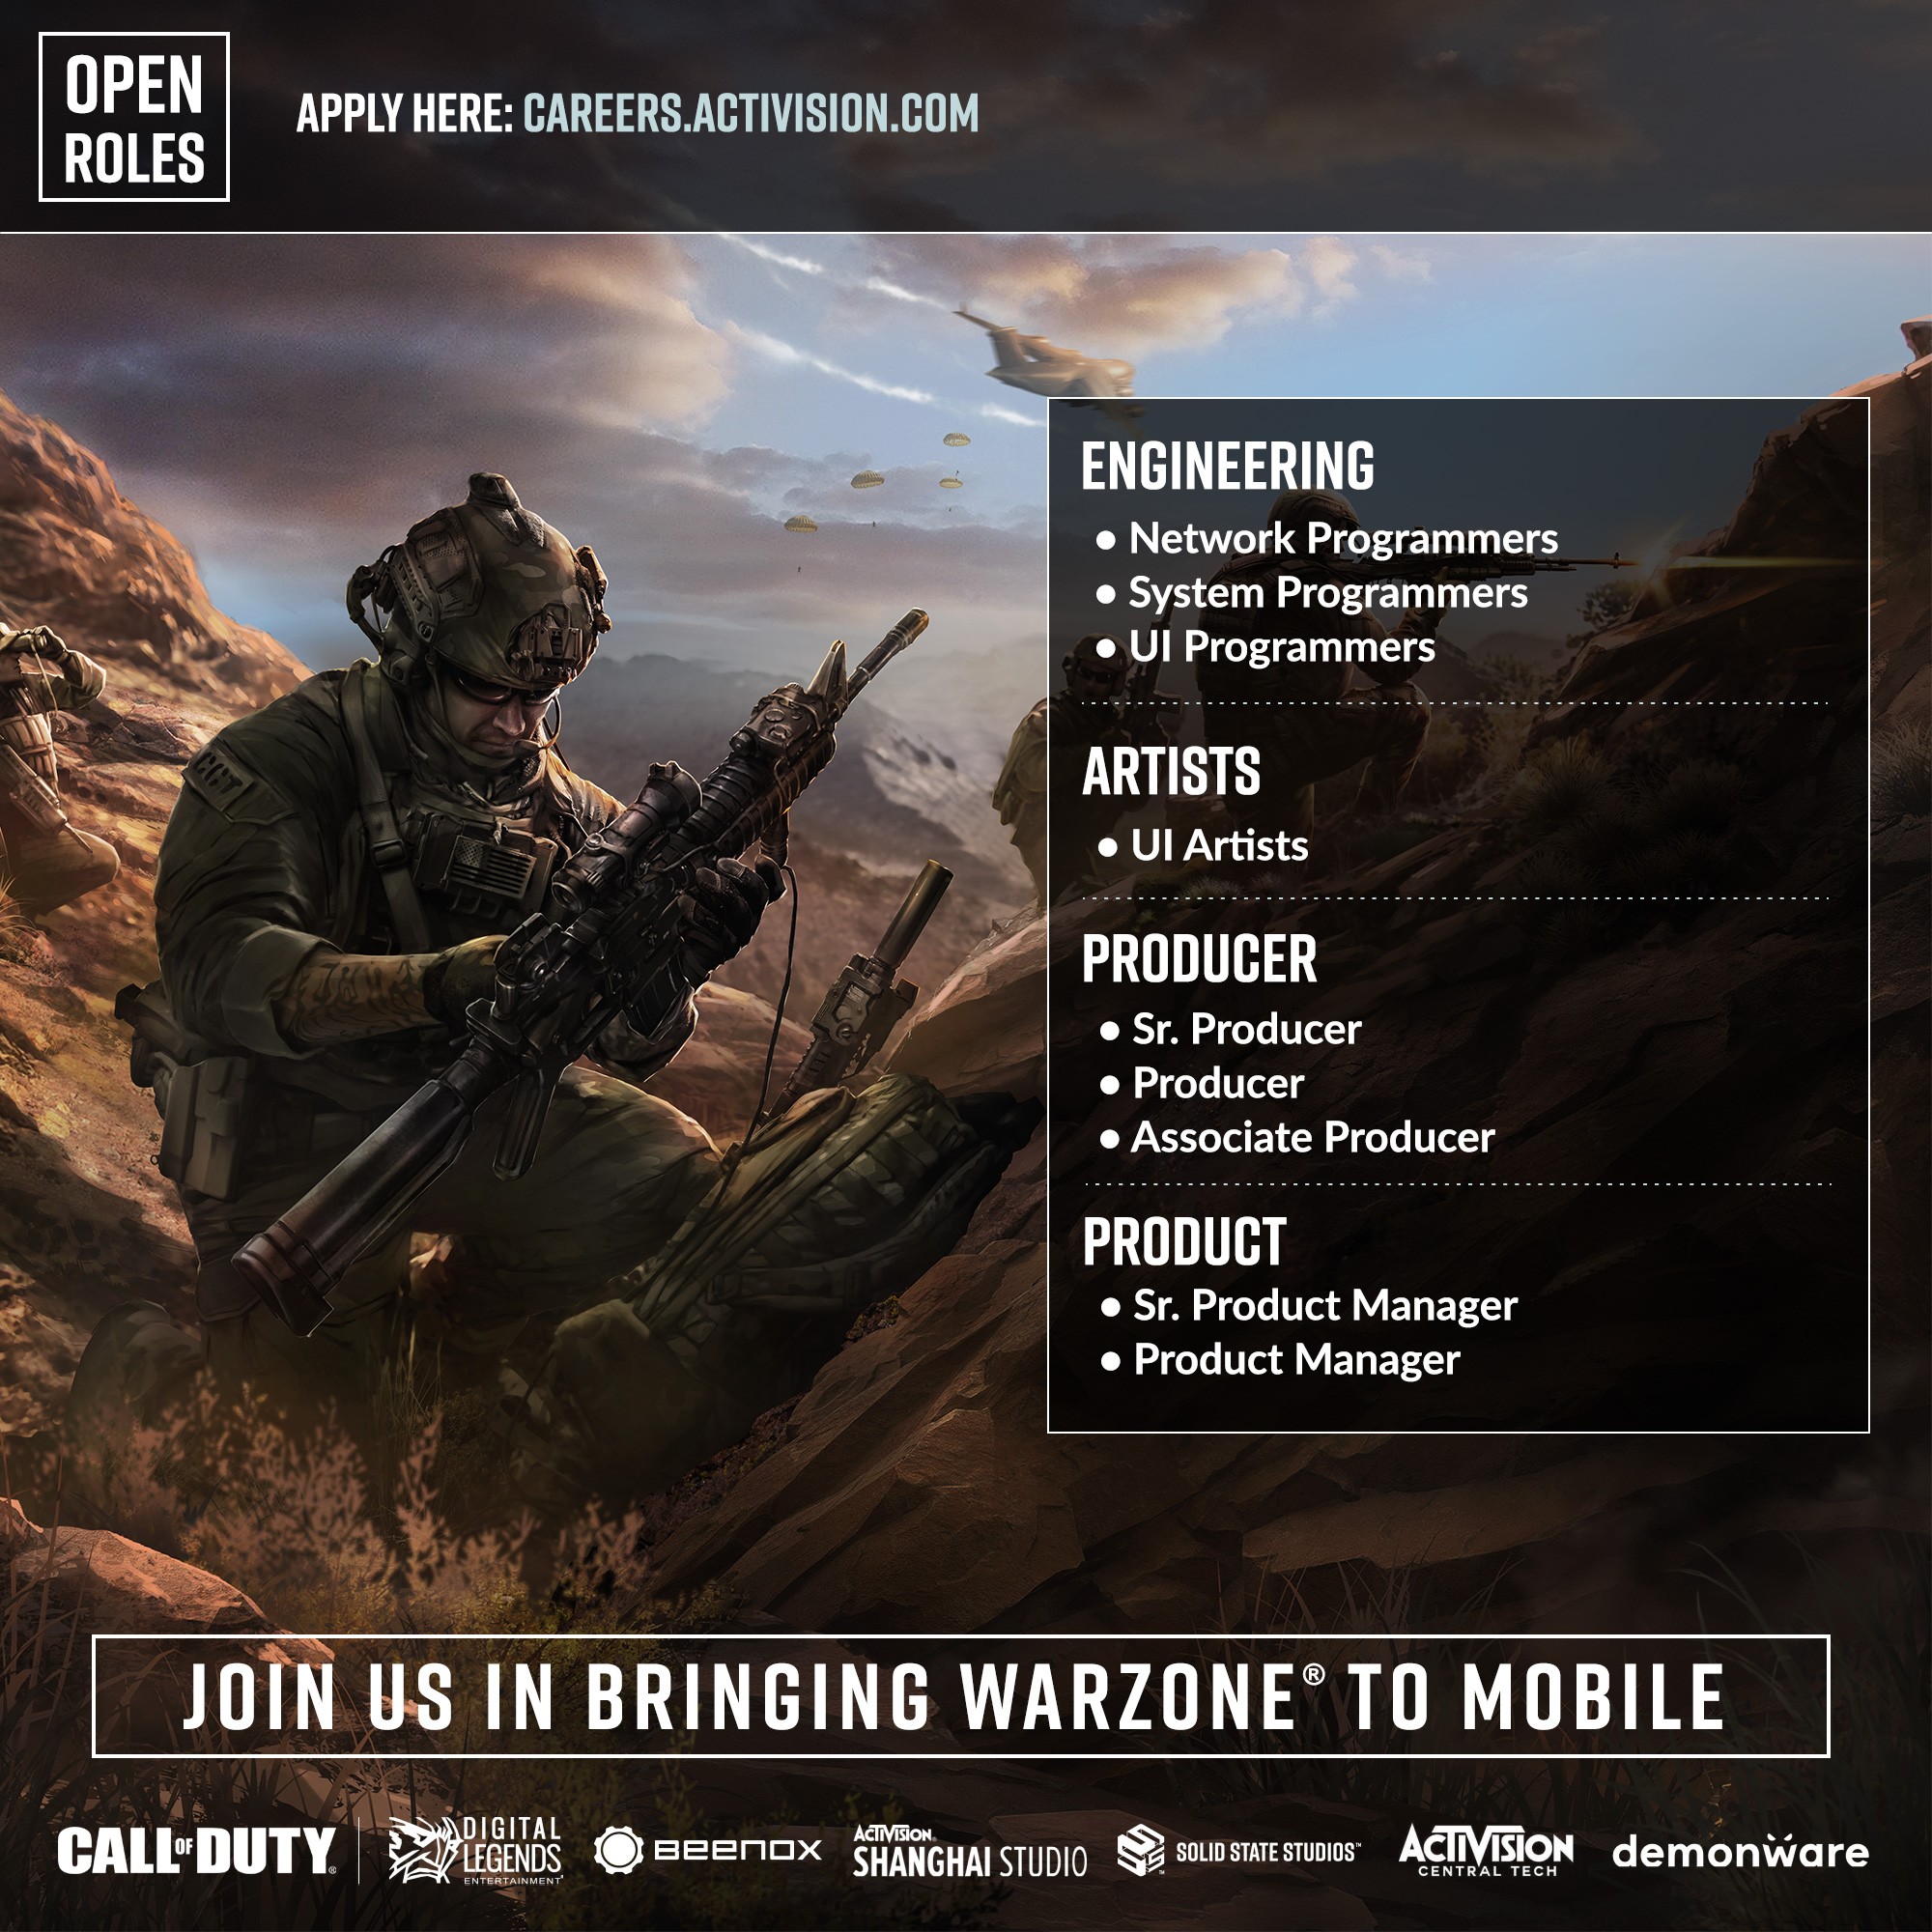 Activision Announces Call of Duty: Warzone Mobile for Both Android and iOS